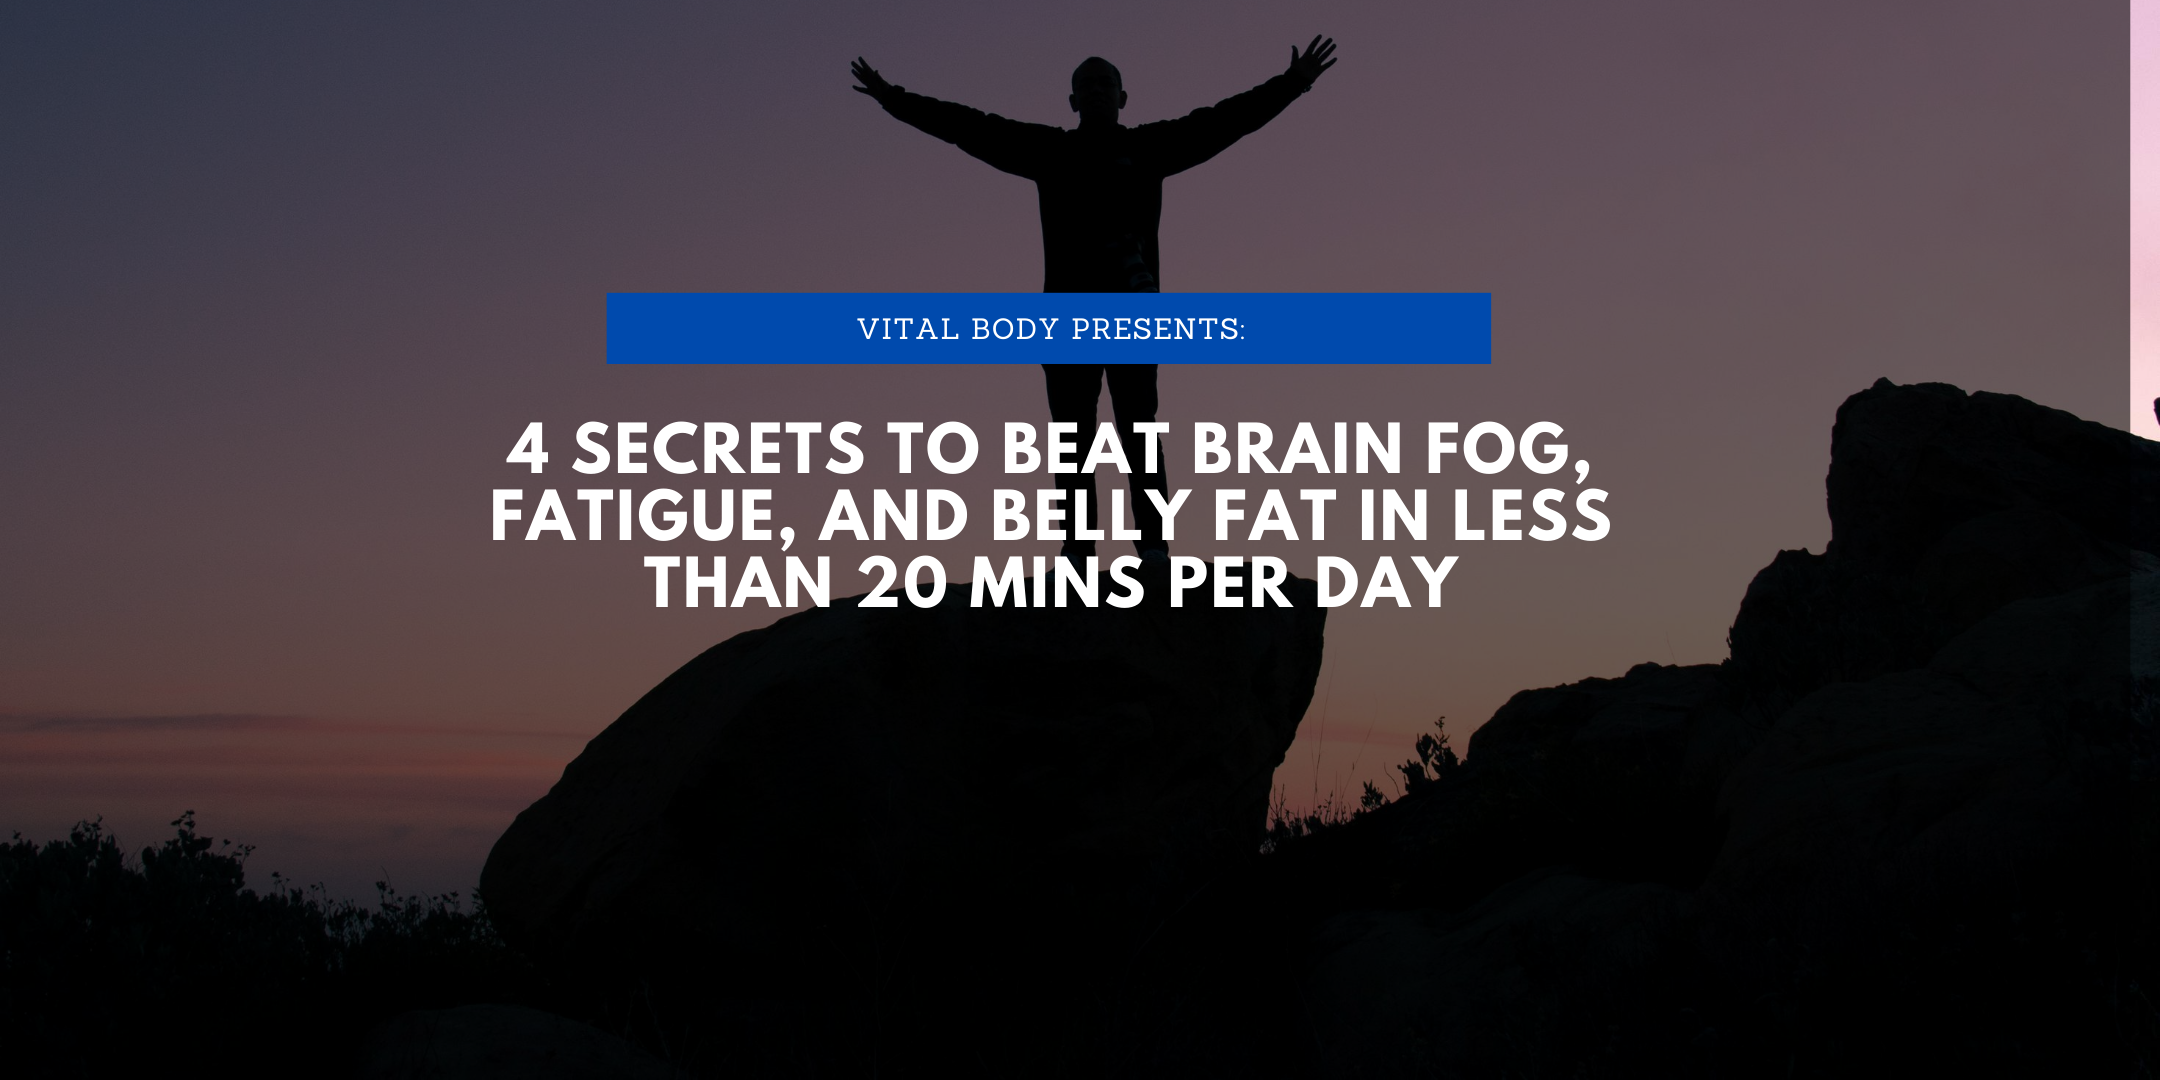 4 Secrets to Eliminate brain fog, fatigue, and fat in less than 20 mins/day